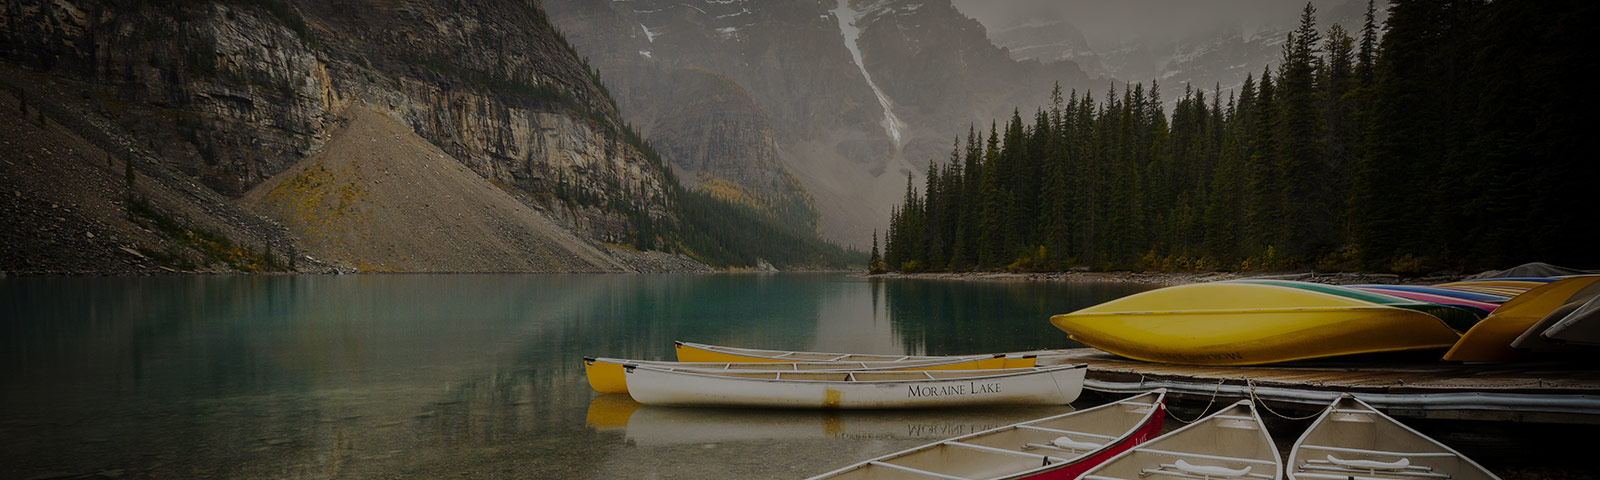 canoes on a lake between mountains